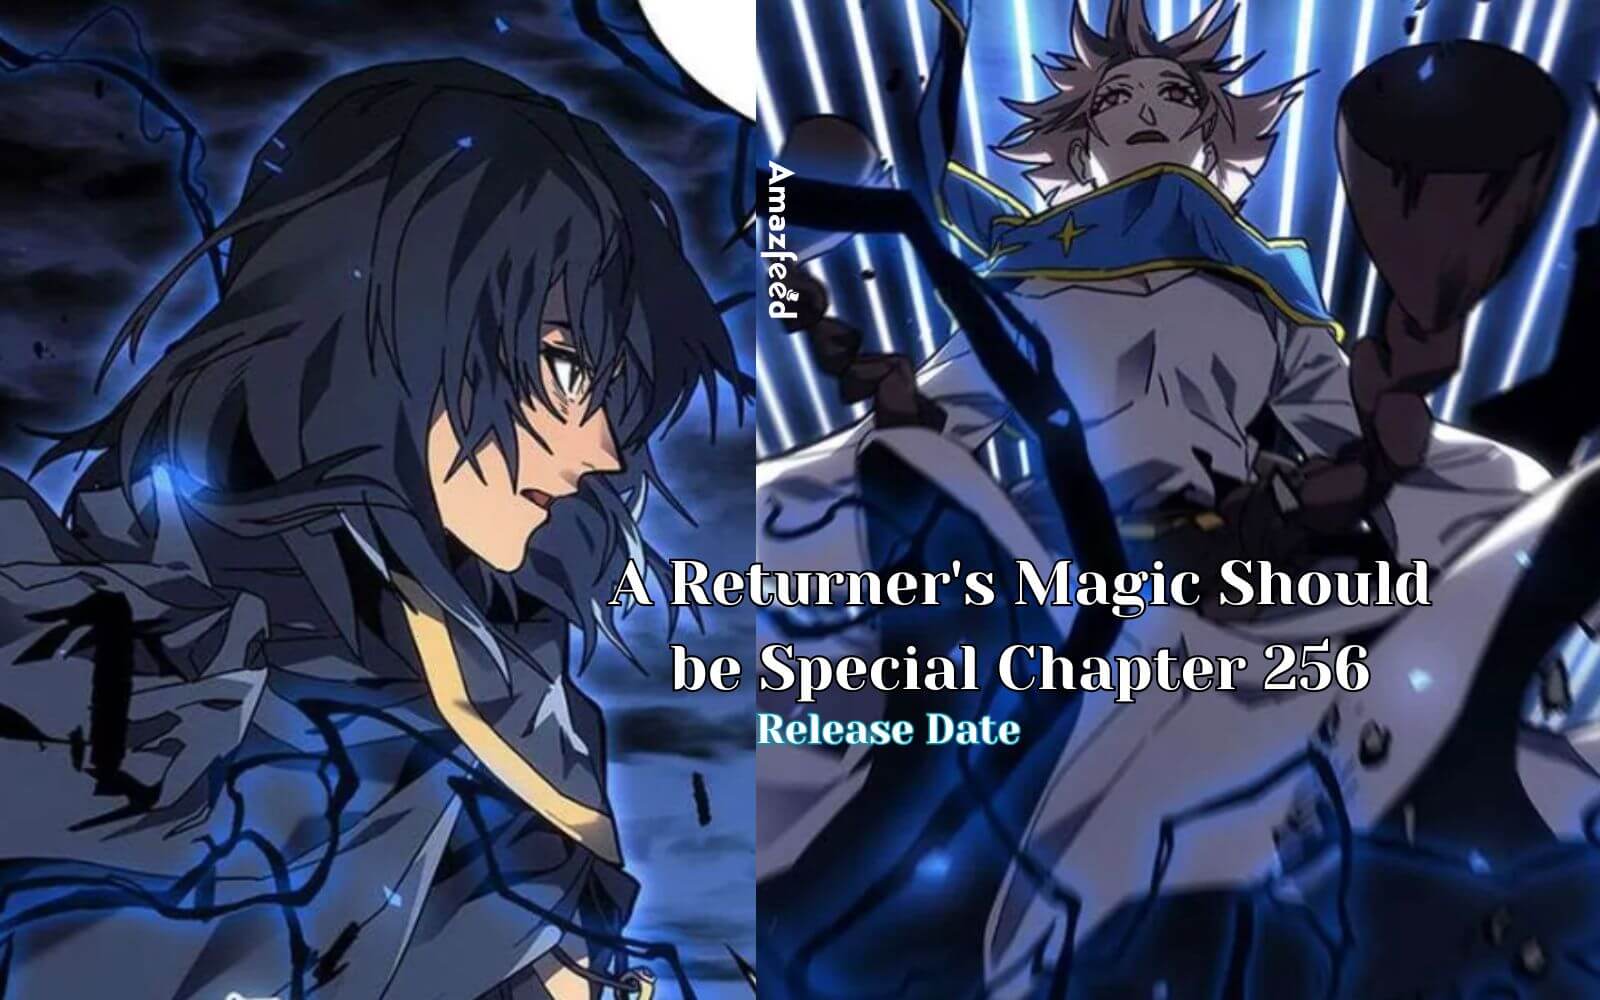 A Returner's Magic Should be Special Chapter 256 Spoiler